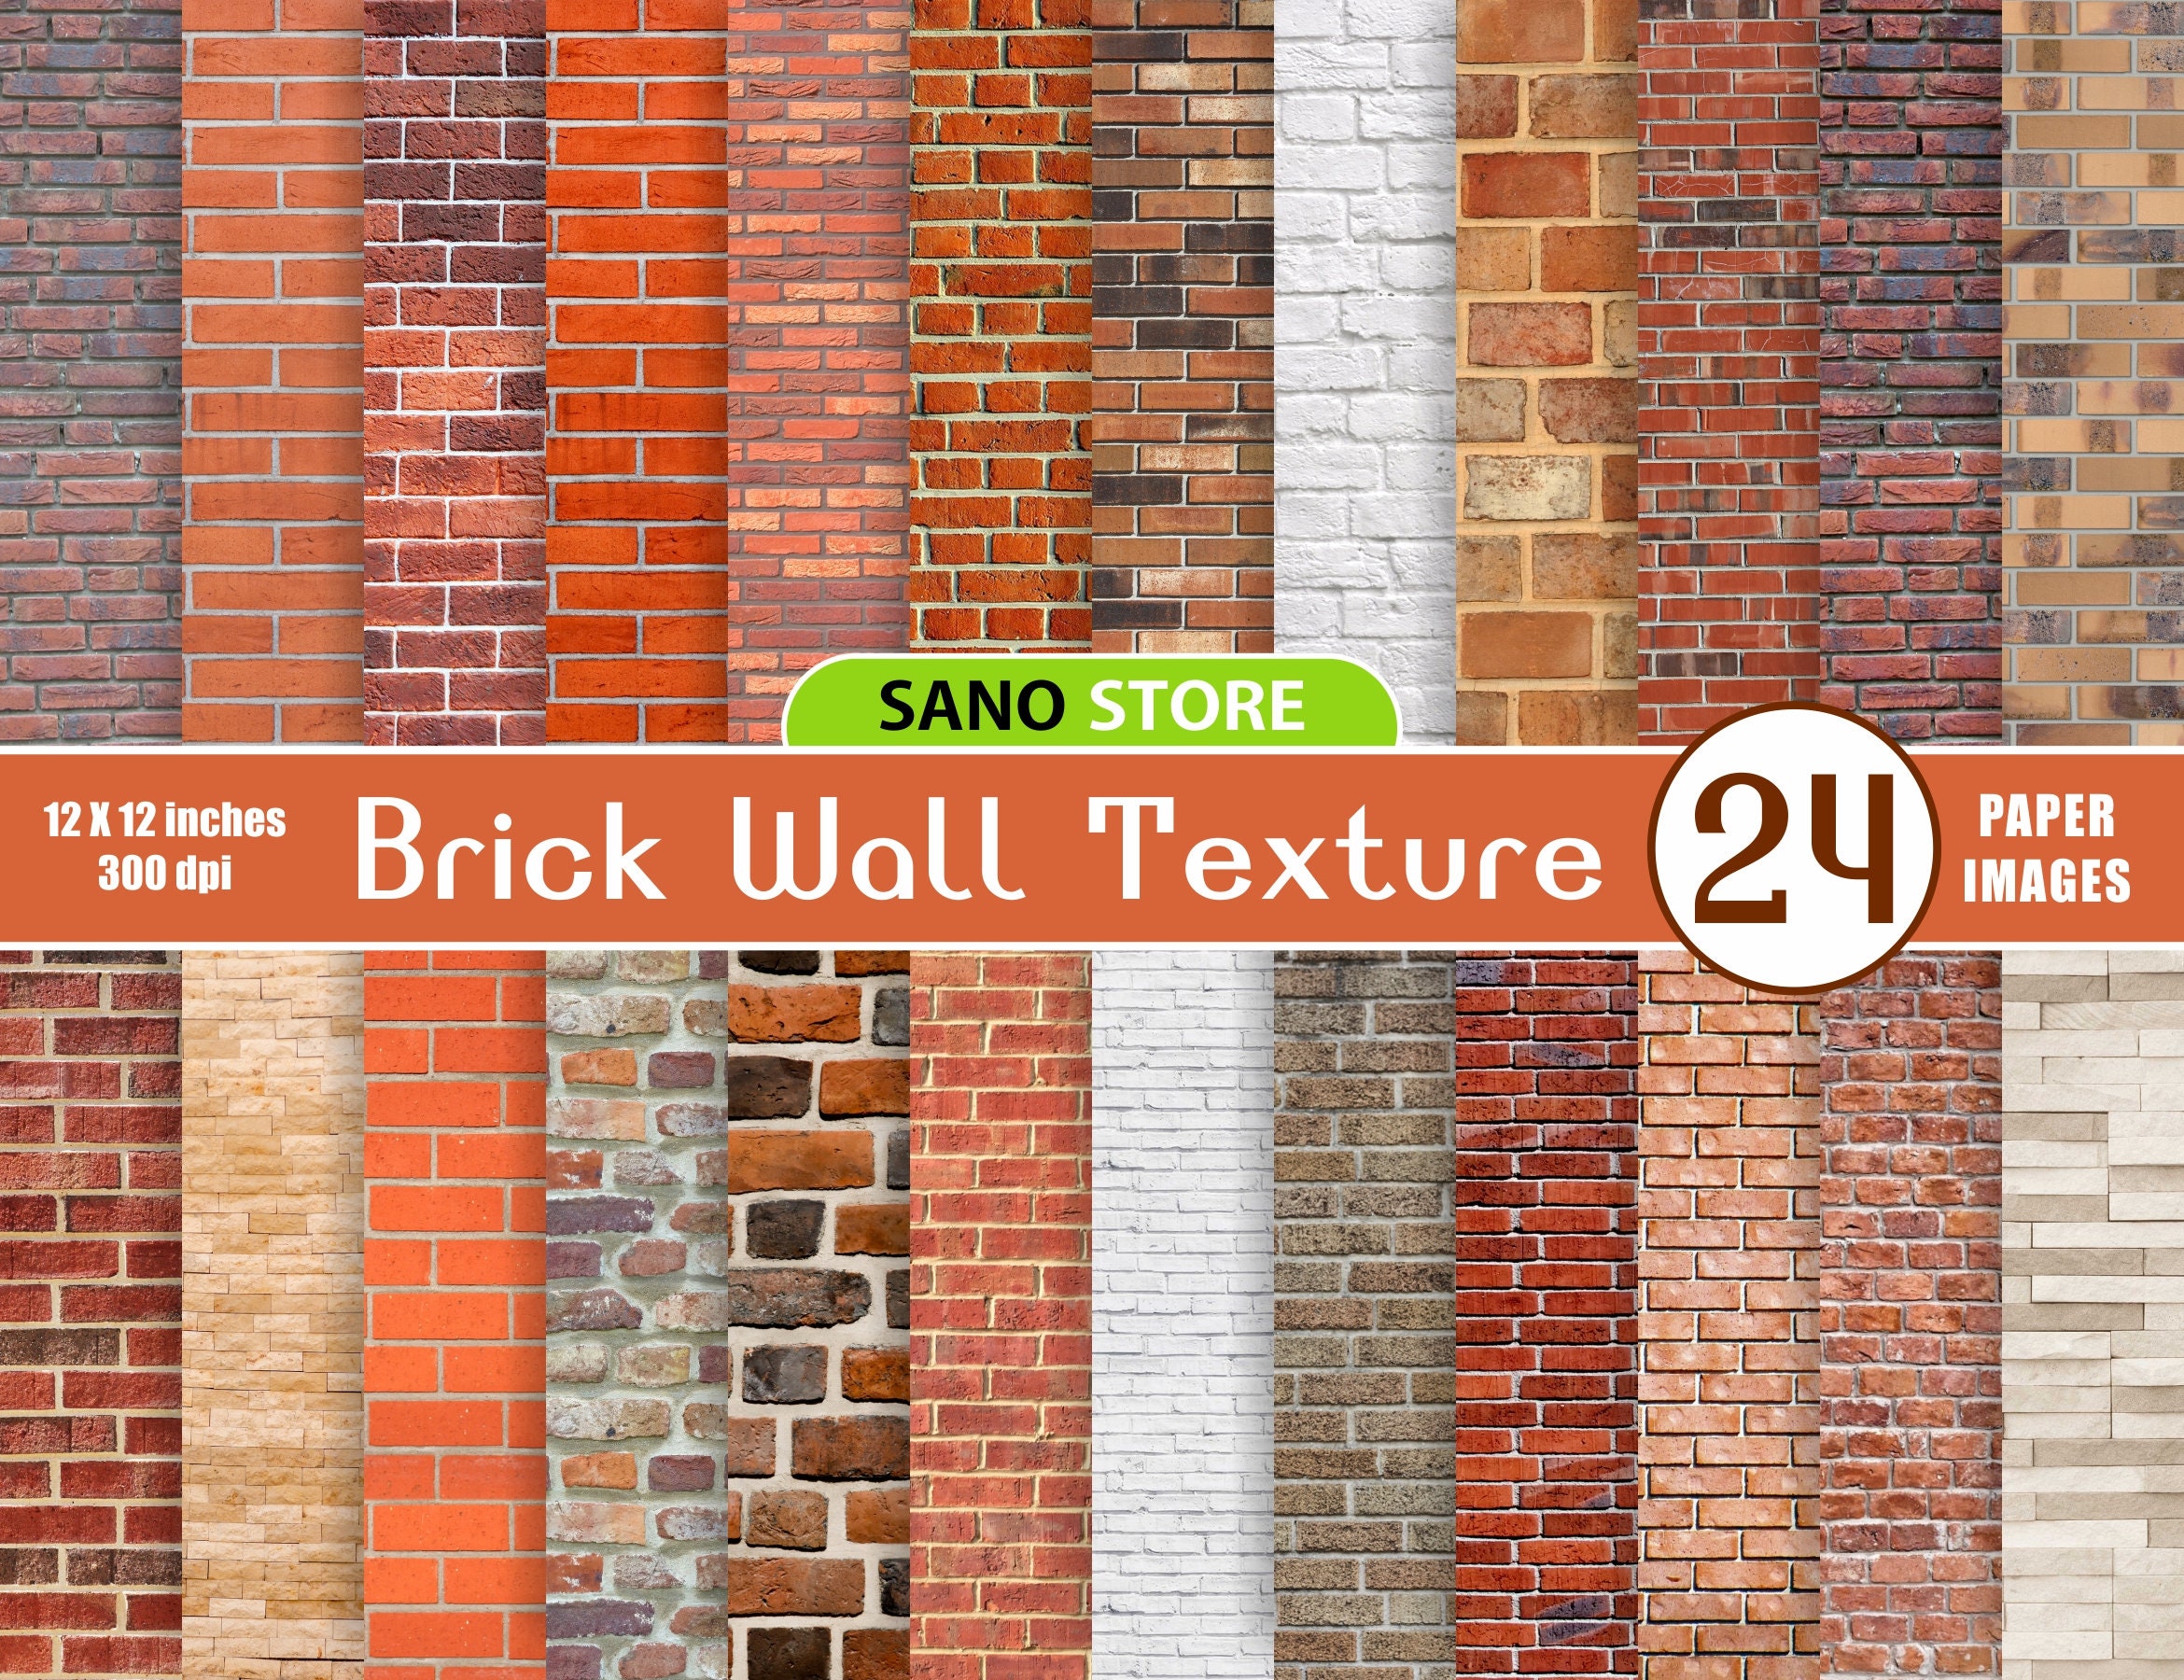 Brick Wall Texture Roller High Quality Texture for Modeling Clay 7 